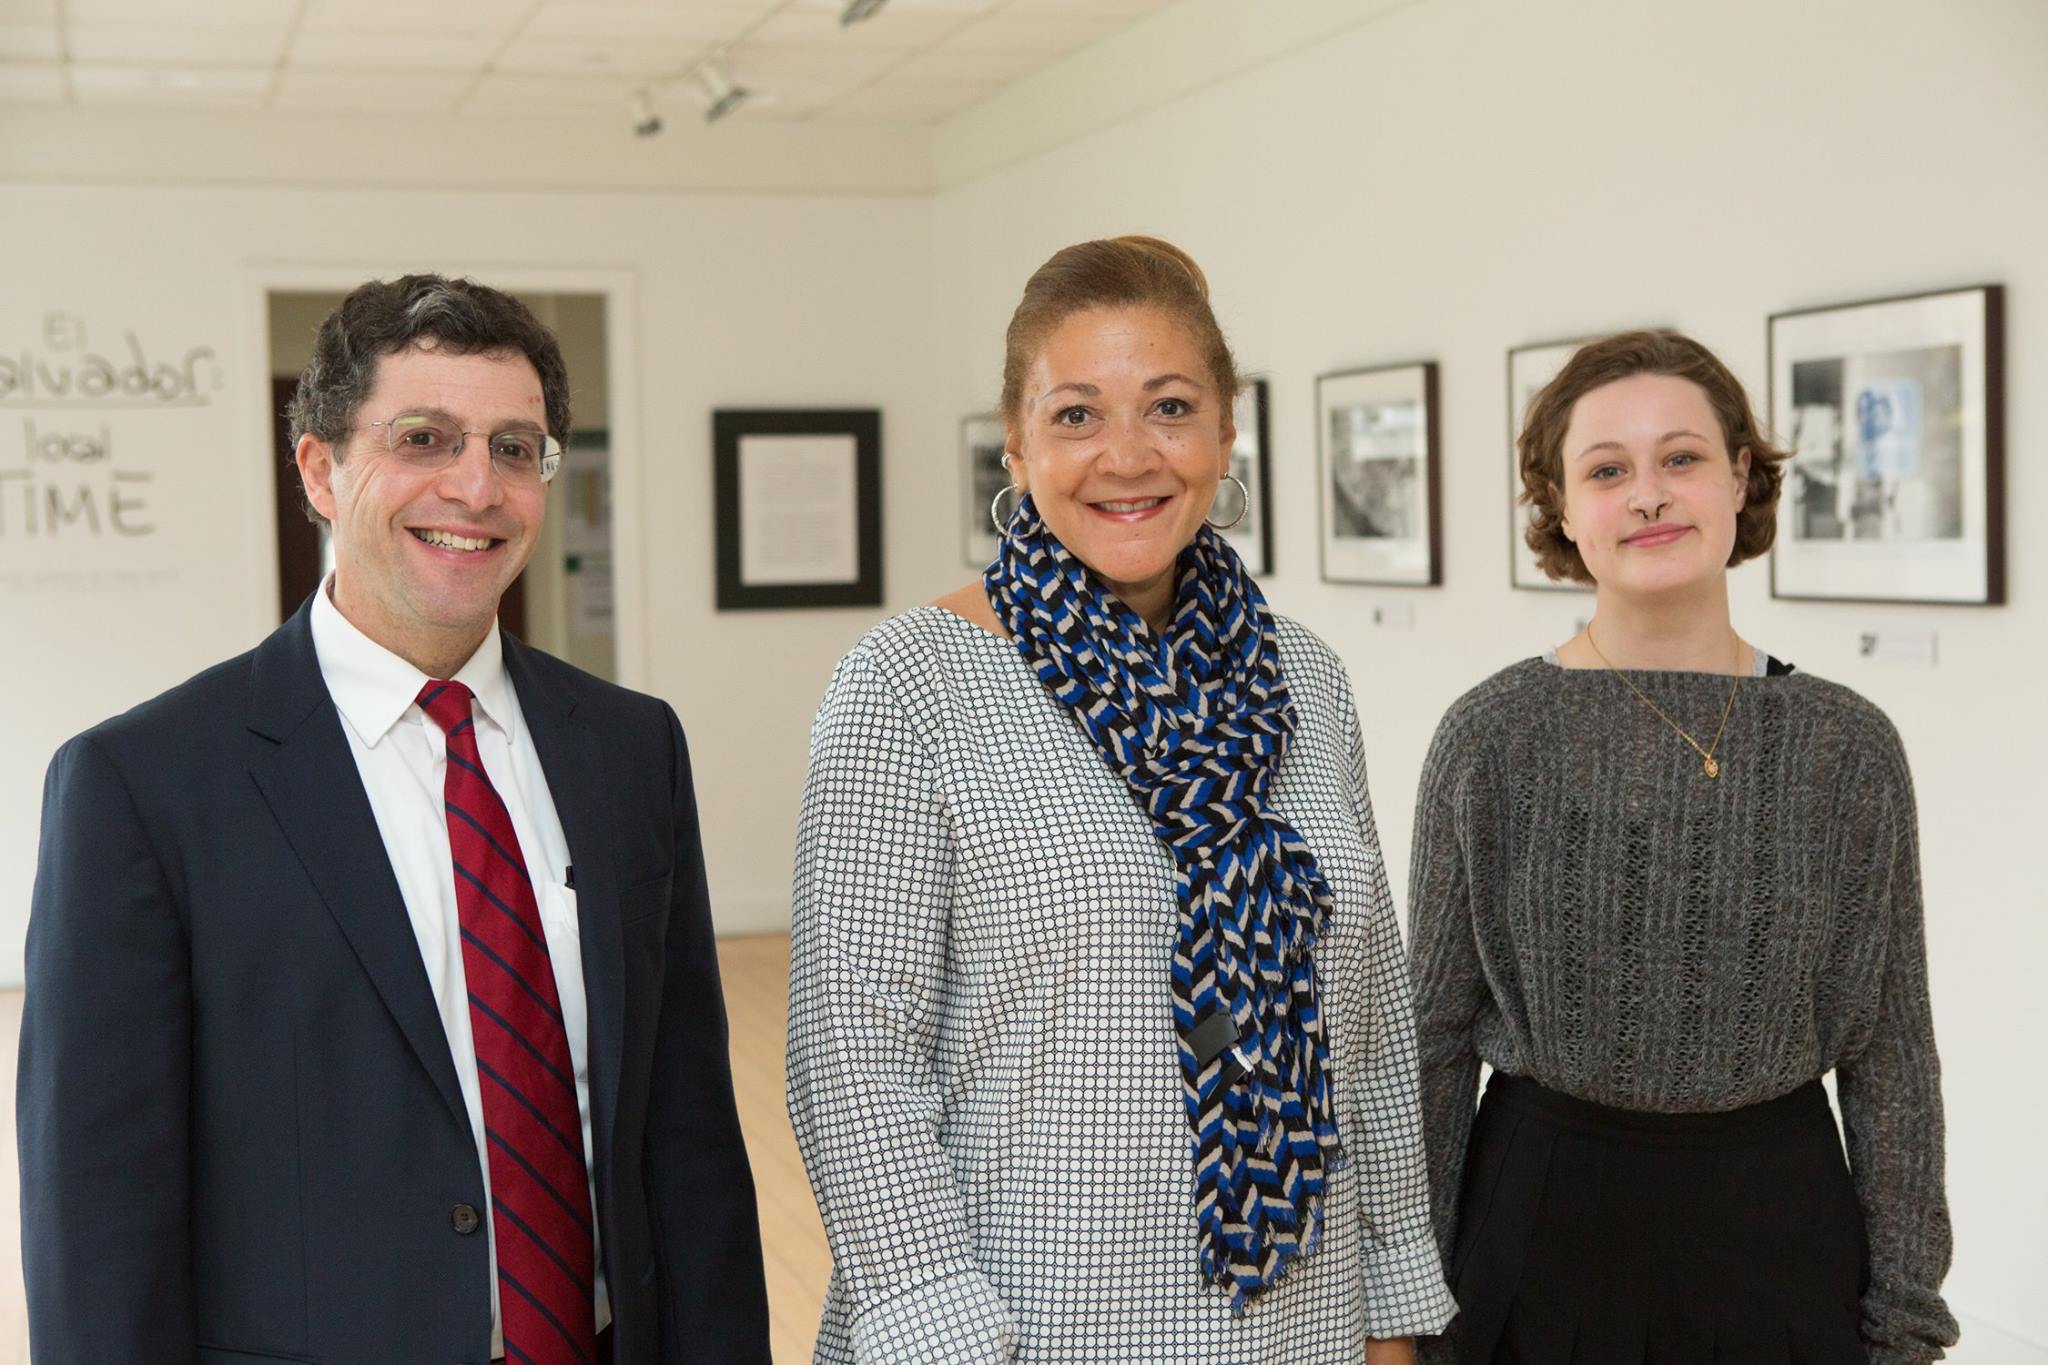  Steven Shapiro, dean of our College of Liberal Arts and Sciences, and student Elizabeth Shugart (right) speak with Michele Norris in Marran Gallery during her visit to campus.